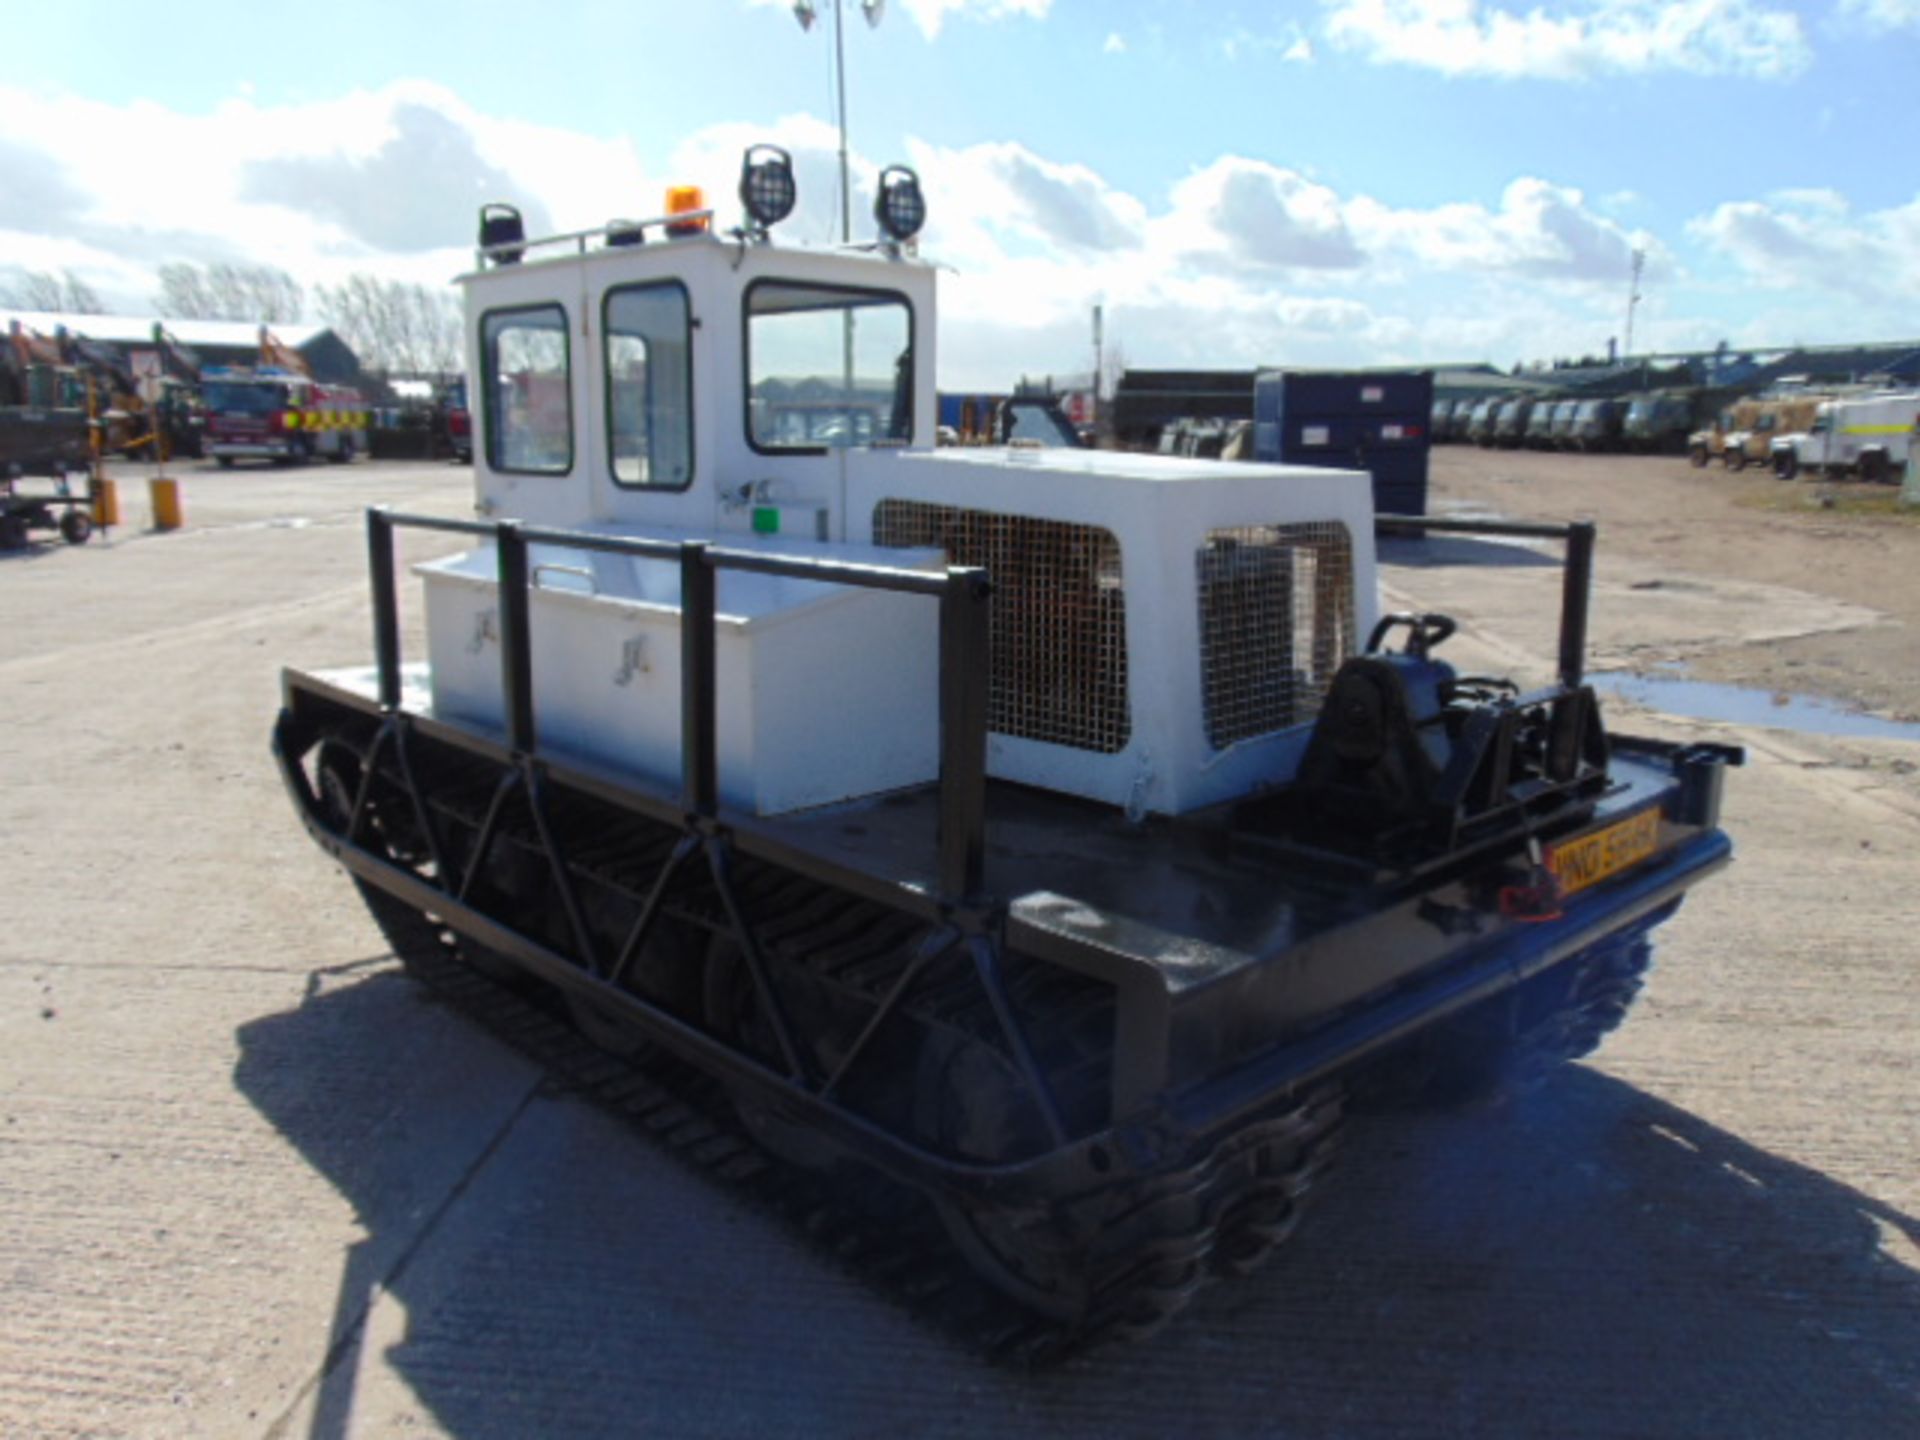 Rolba Bombardier Muskeg MM 80 All Terrain Tracked Vehicle with Rear Mounted Boughton Winch - Bild 5 aus 32